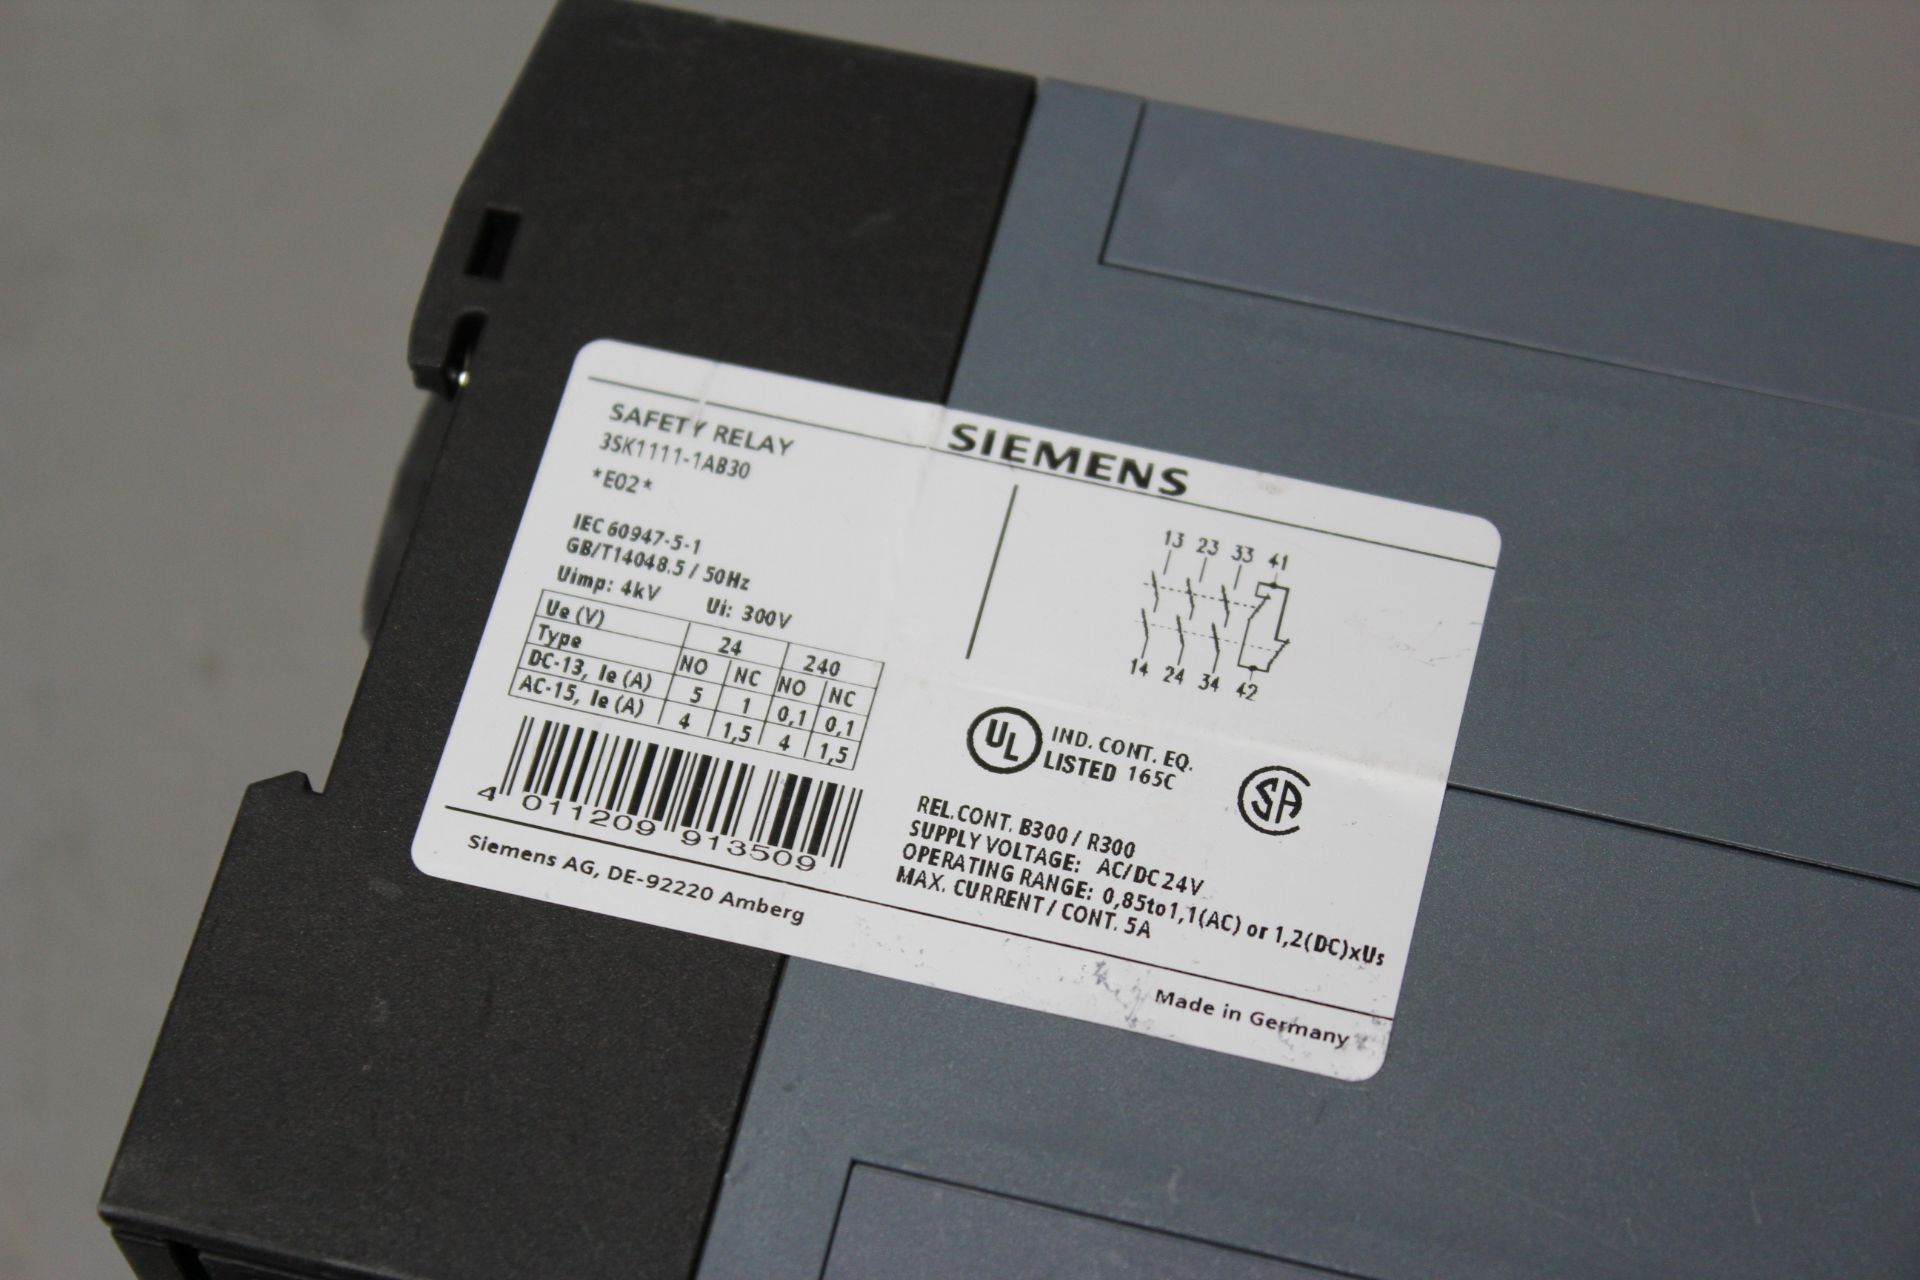 LOT OF 4 SIEMENS SAFETY RELAYS - Image 3 of 3